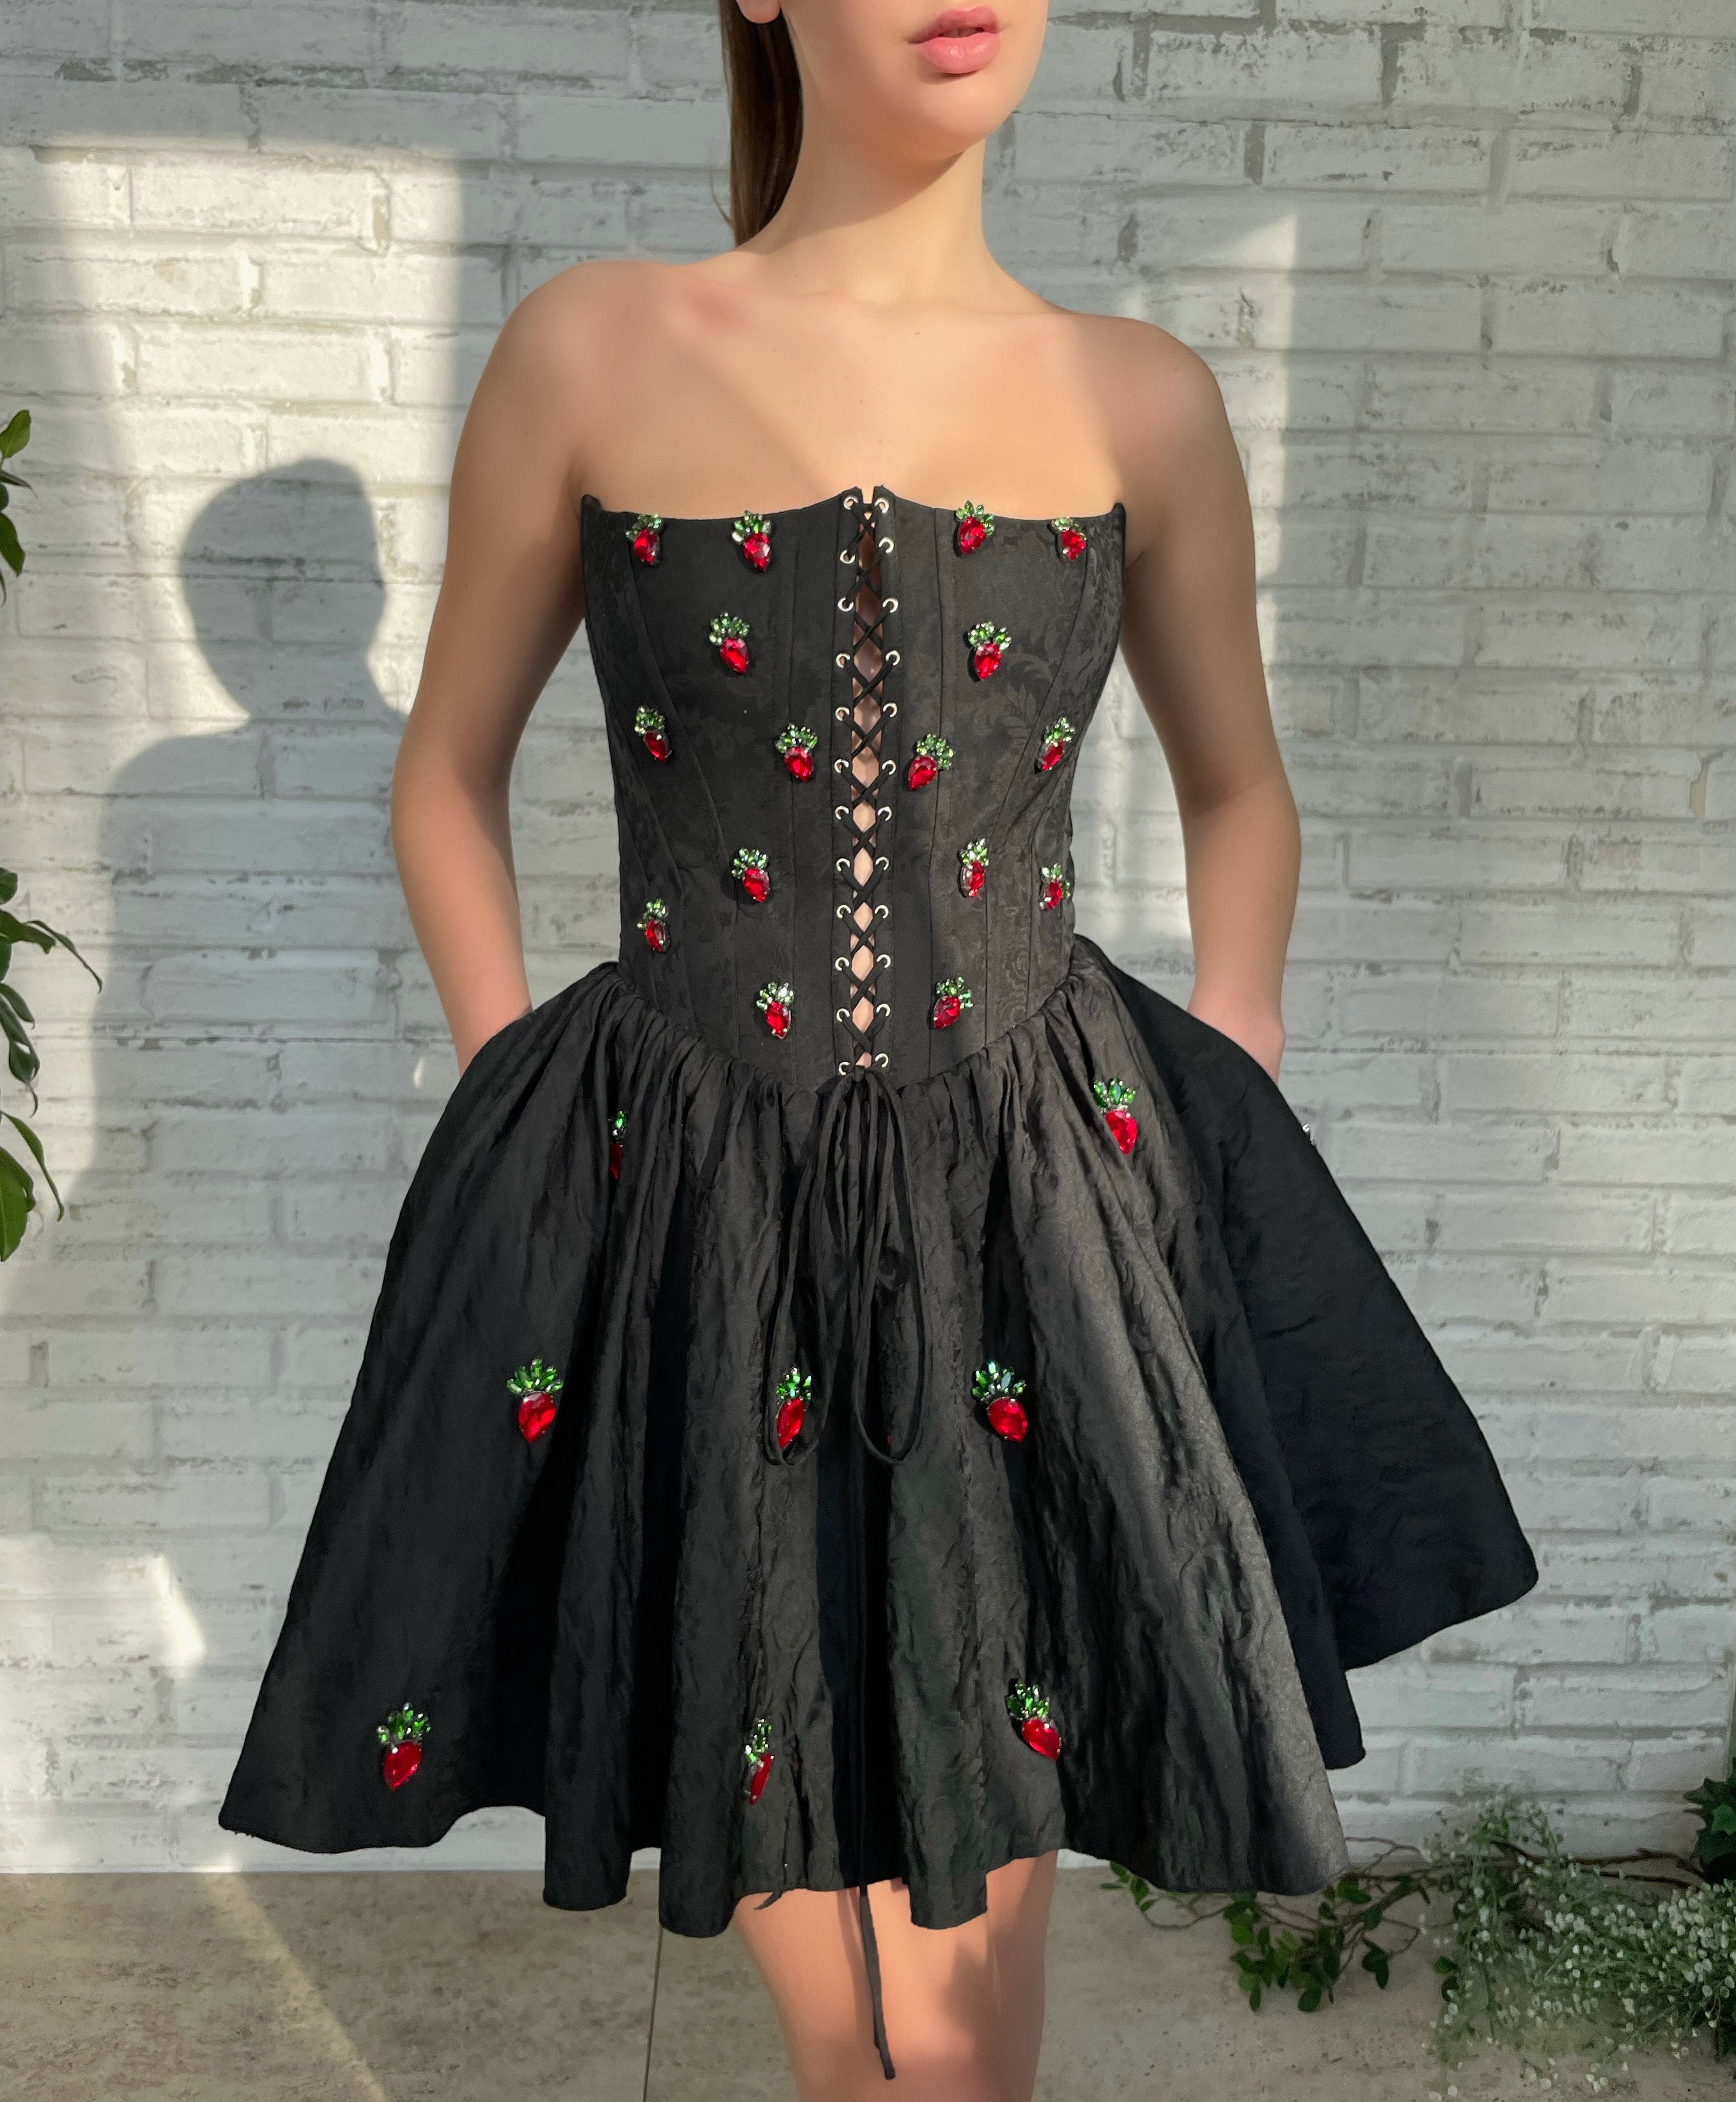 Black mini dress with no sleeves and embroidery